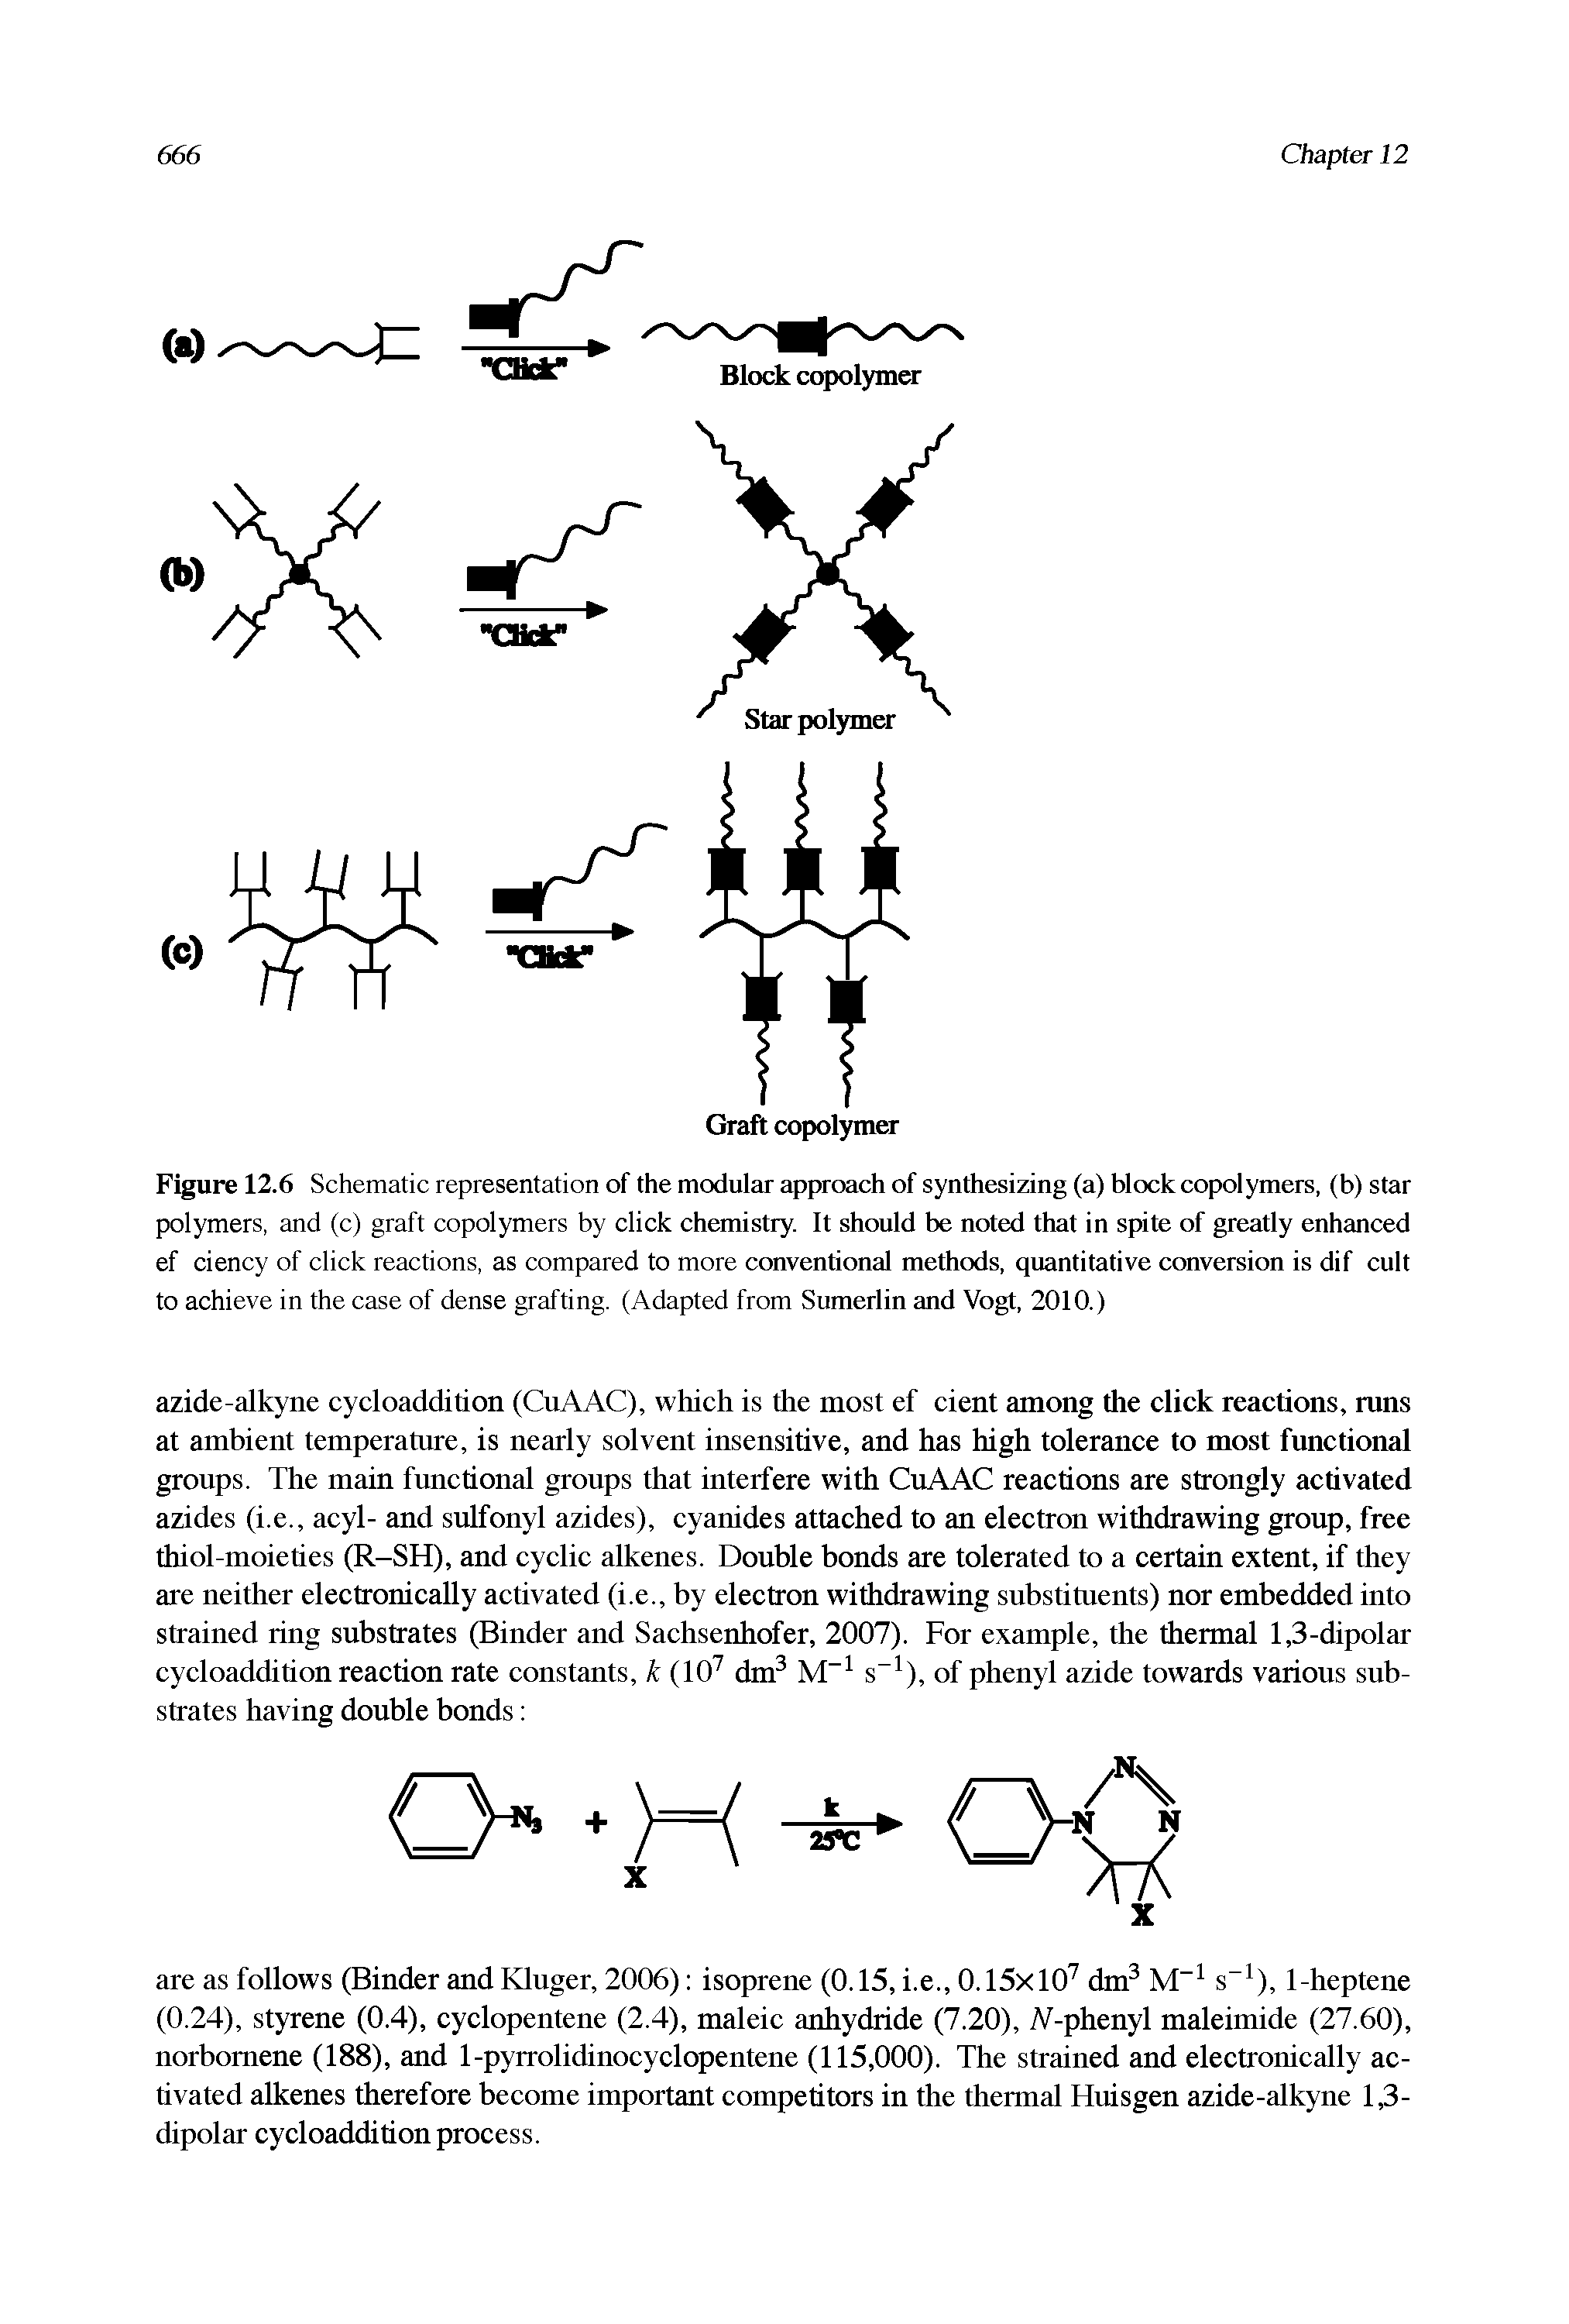 Figure 12.6 Schematic representation of the modular approach of synthesizing (a) block copolymers, (b) star polymers, and (c) graft copolymers by click chemistry. It should be noted that in spite of greatly enhanced ef ciency of click reactions, as compared to more conventional methods, quantitative conversion is dif cult to achieve in the case of dense grafting. (Adapted from Sumerlin and Vogt, 2010.)...